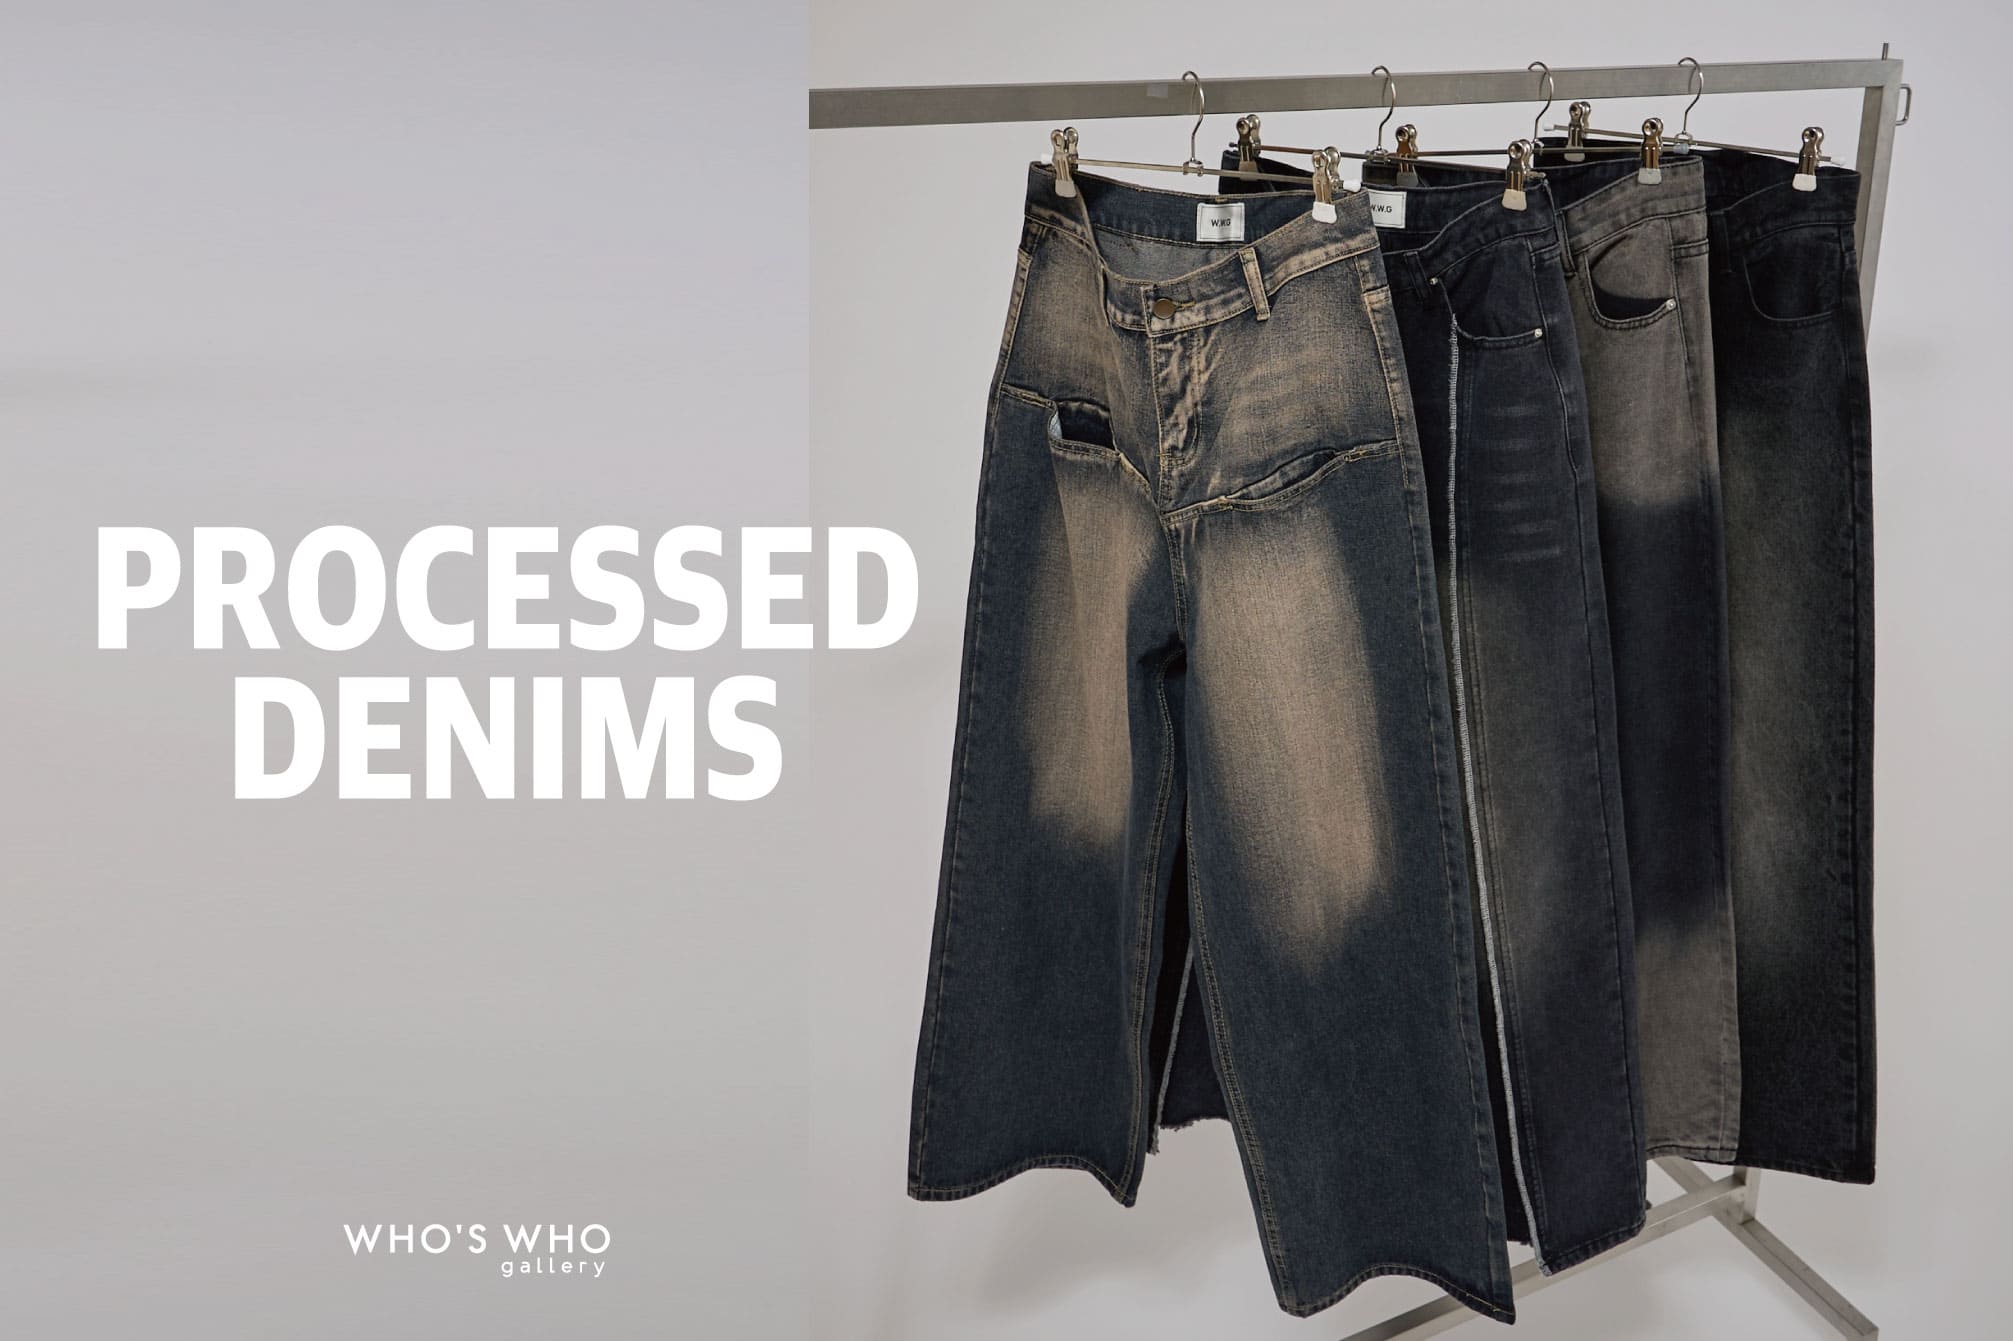 WHO’S WHO gallery 【PROCESSED DENIMS】